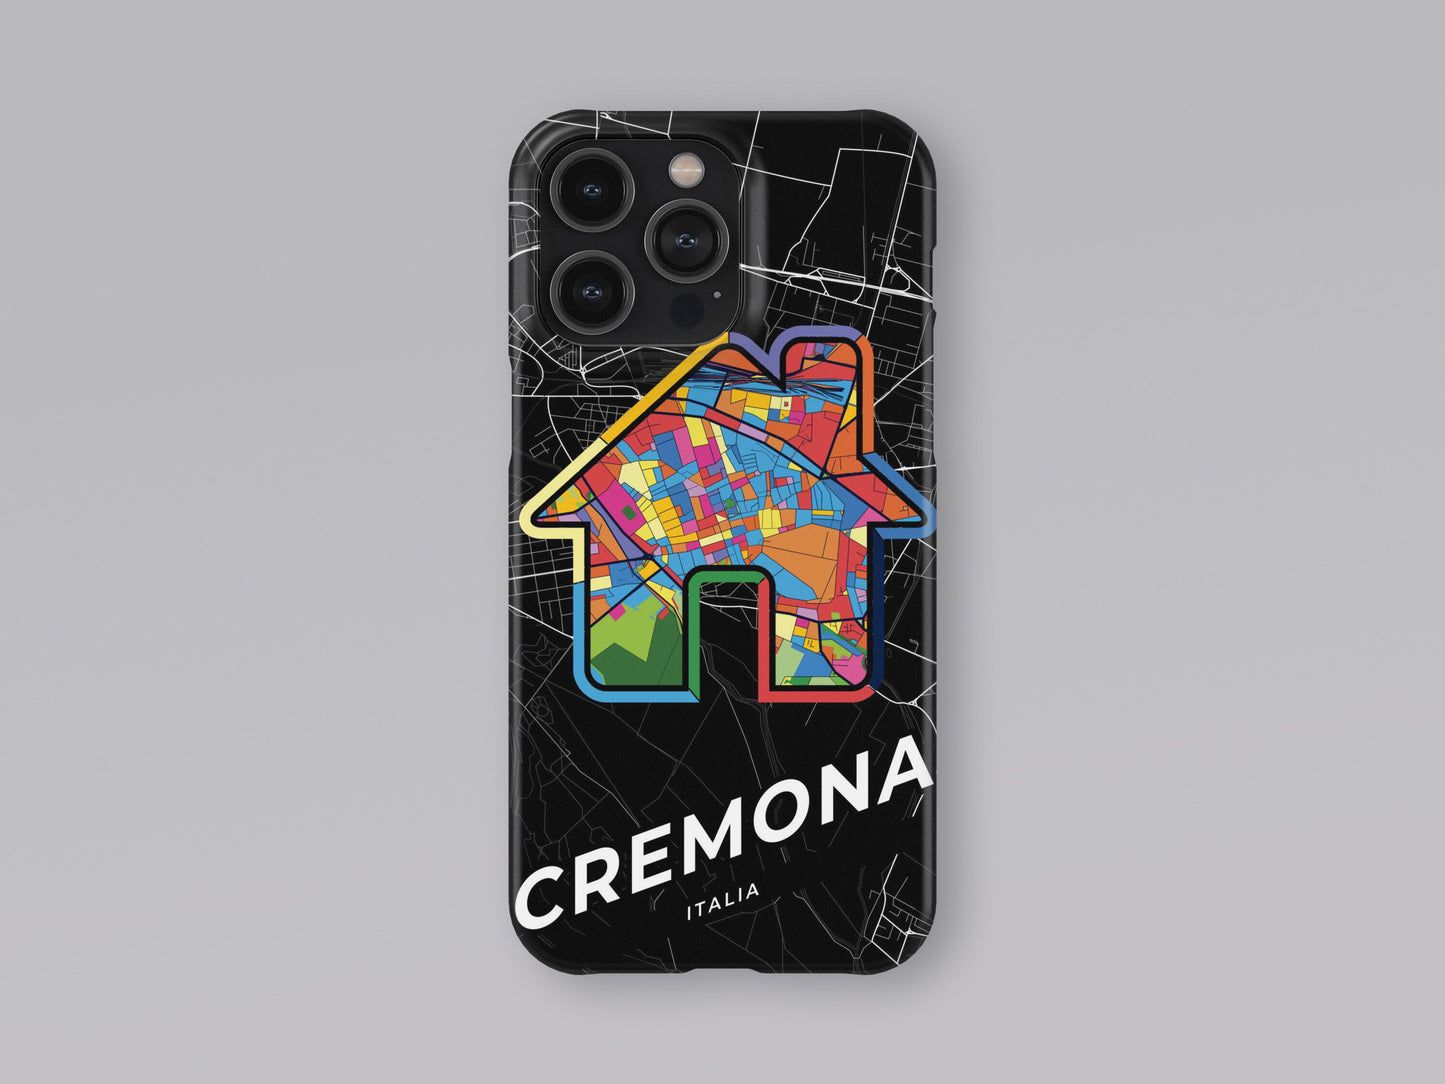 Cremona Italy slim phone case with colorful icon. Birthday, wedding or housewarming gift. Couple match cases. 3